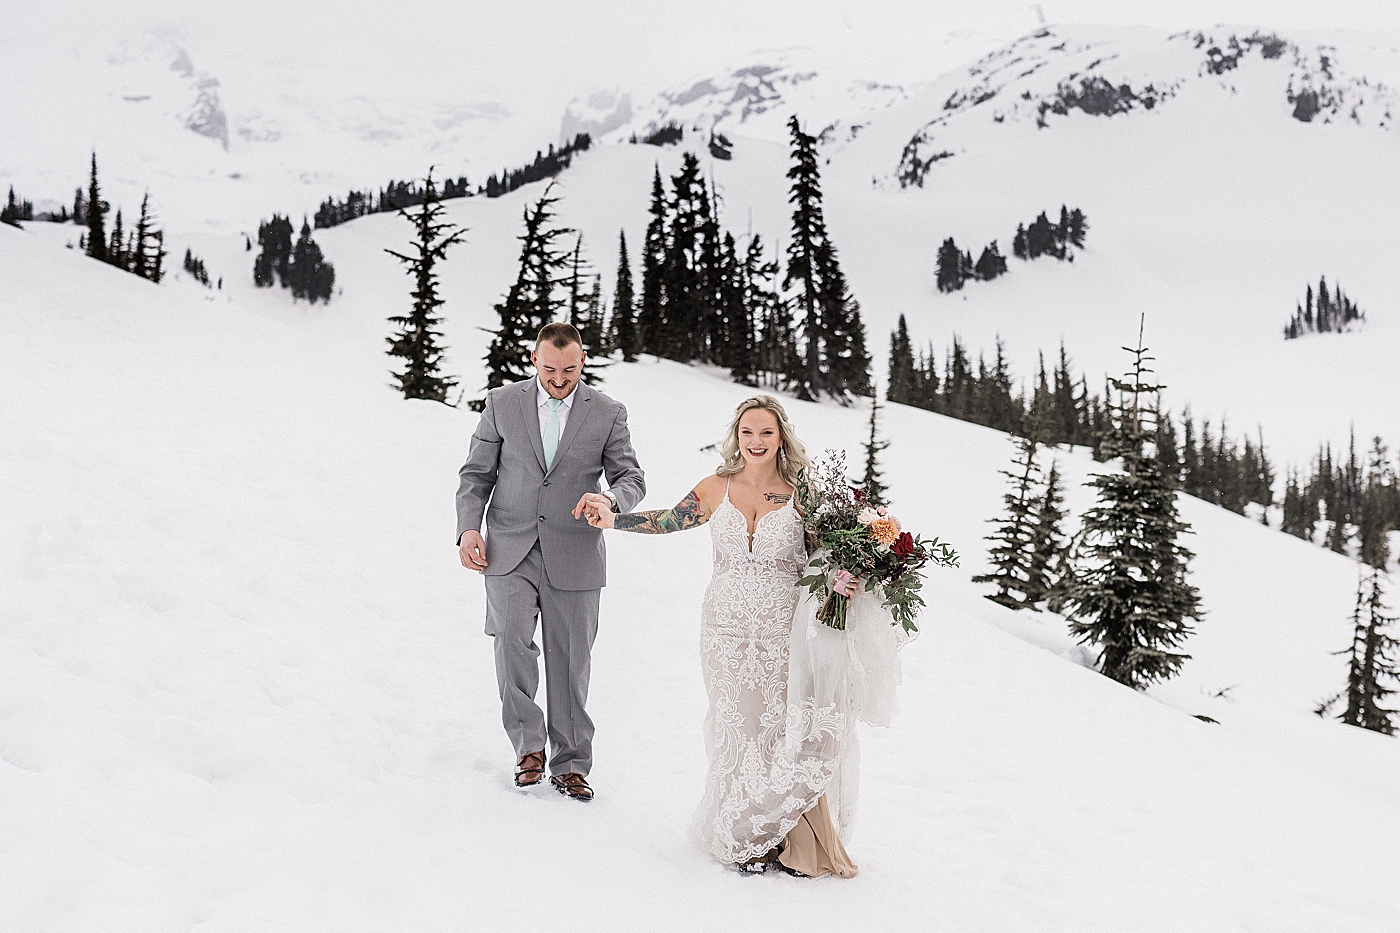 Bride and groom photos in the snow at Mt Rainier. Photo by Megan Montalvo Photography.